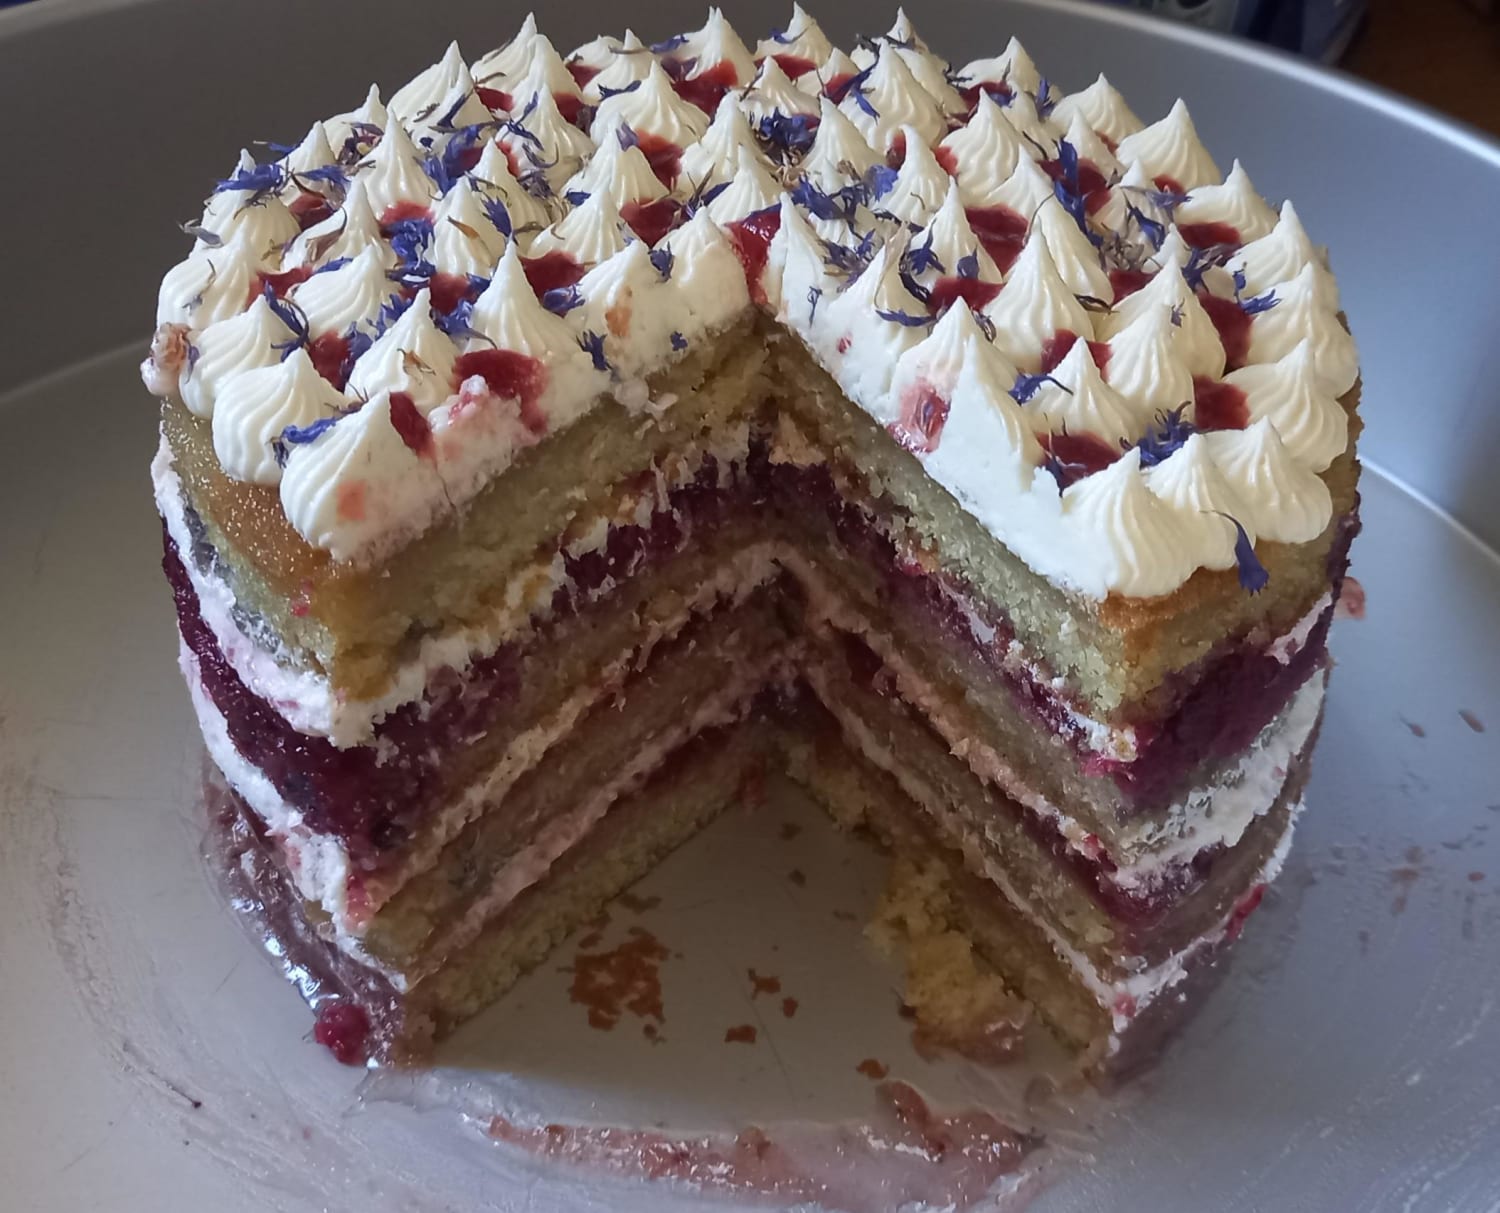 Victoria sponge kind of. vanilla sponge, strawberry jam, mixed berry compote, burnt strawberry sauce and milk frosting